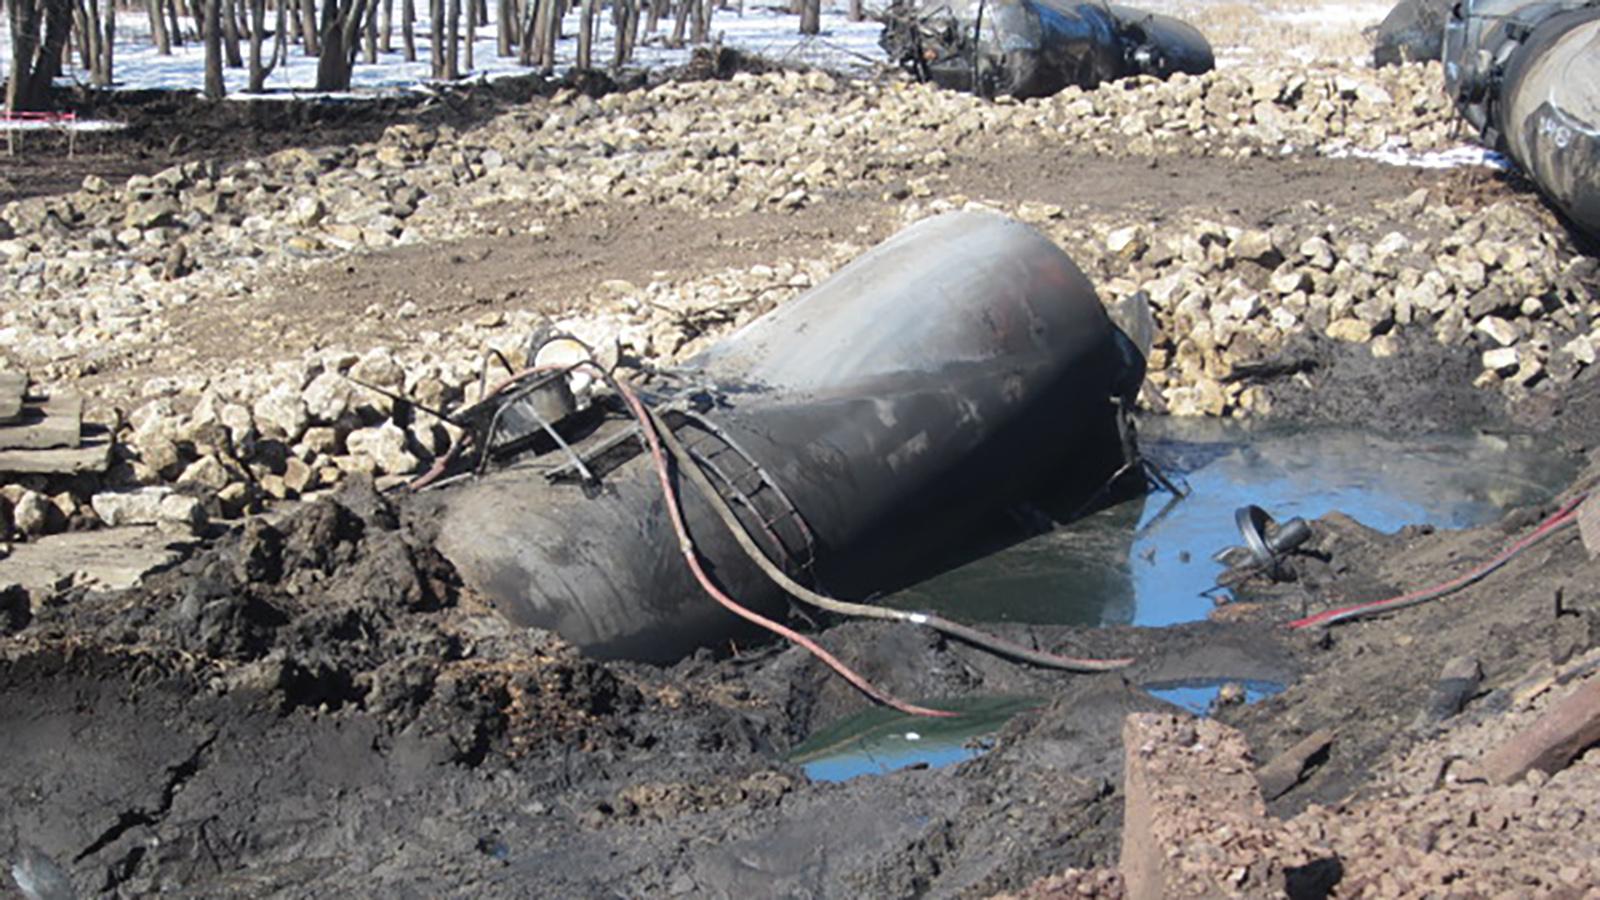 Pools of accumulated crude oil around develop around one of the derailed tank cars as pictured on March 9, 2015, after a derailment in Galena, Illinois. (Environmental Protection Agency)